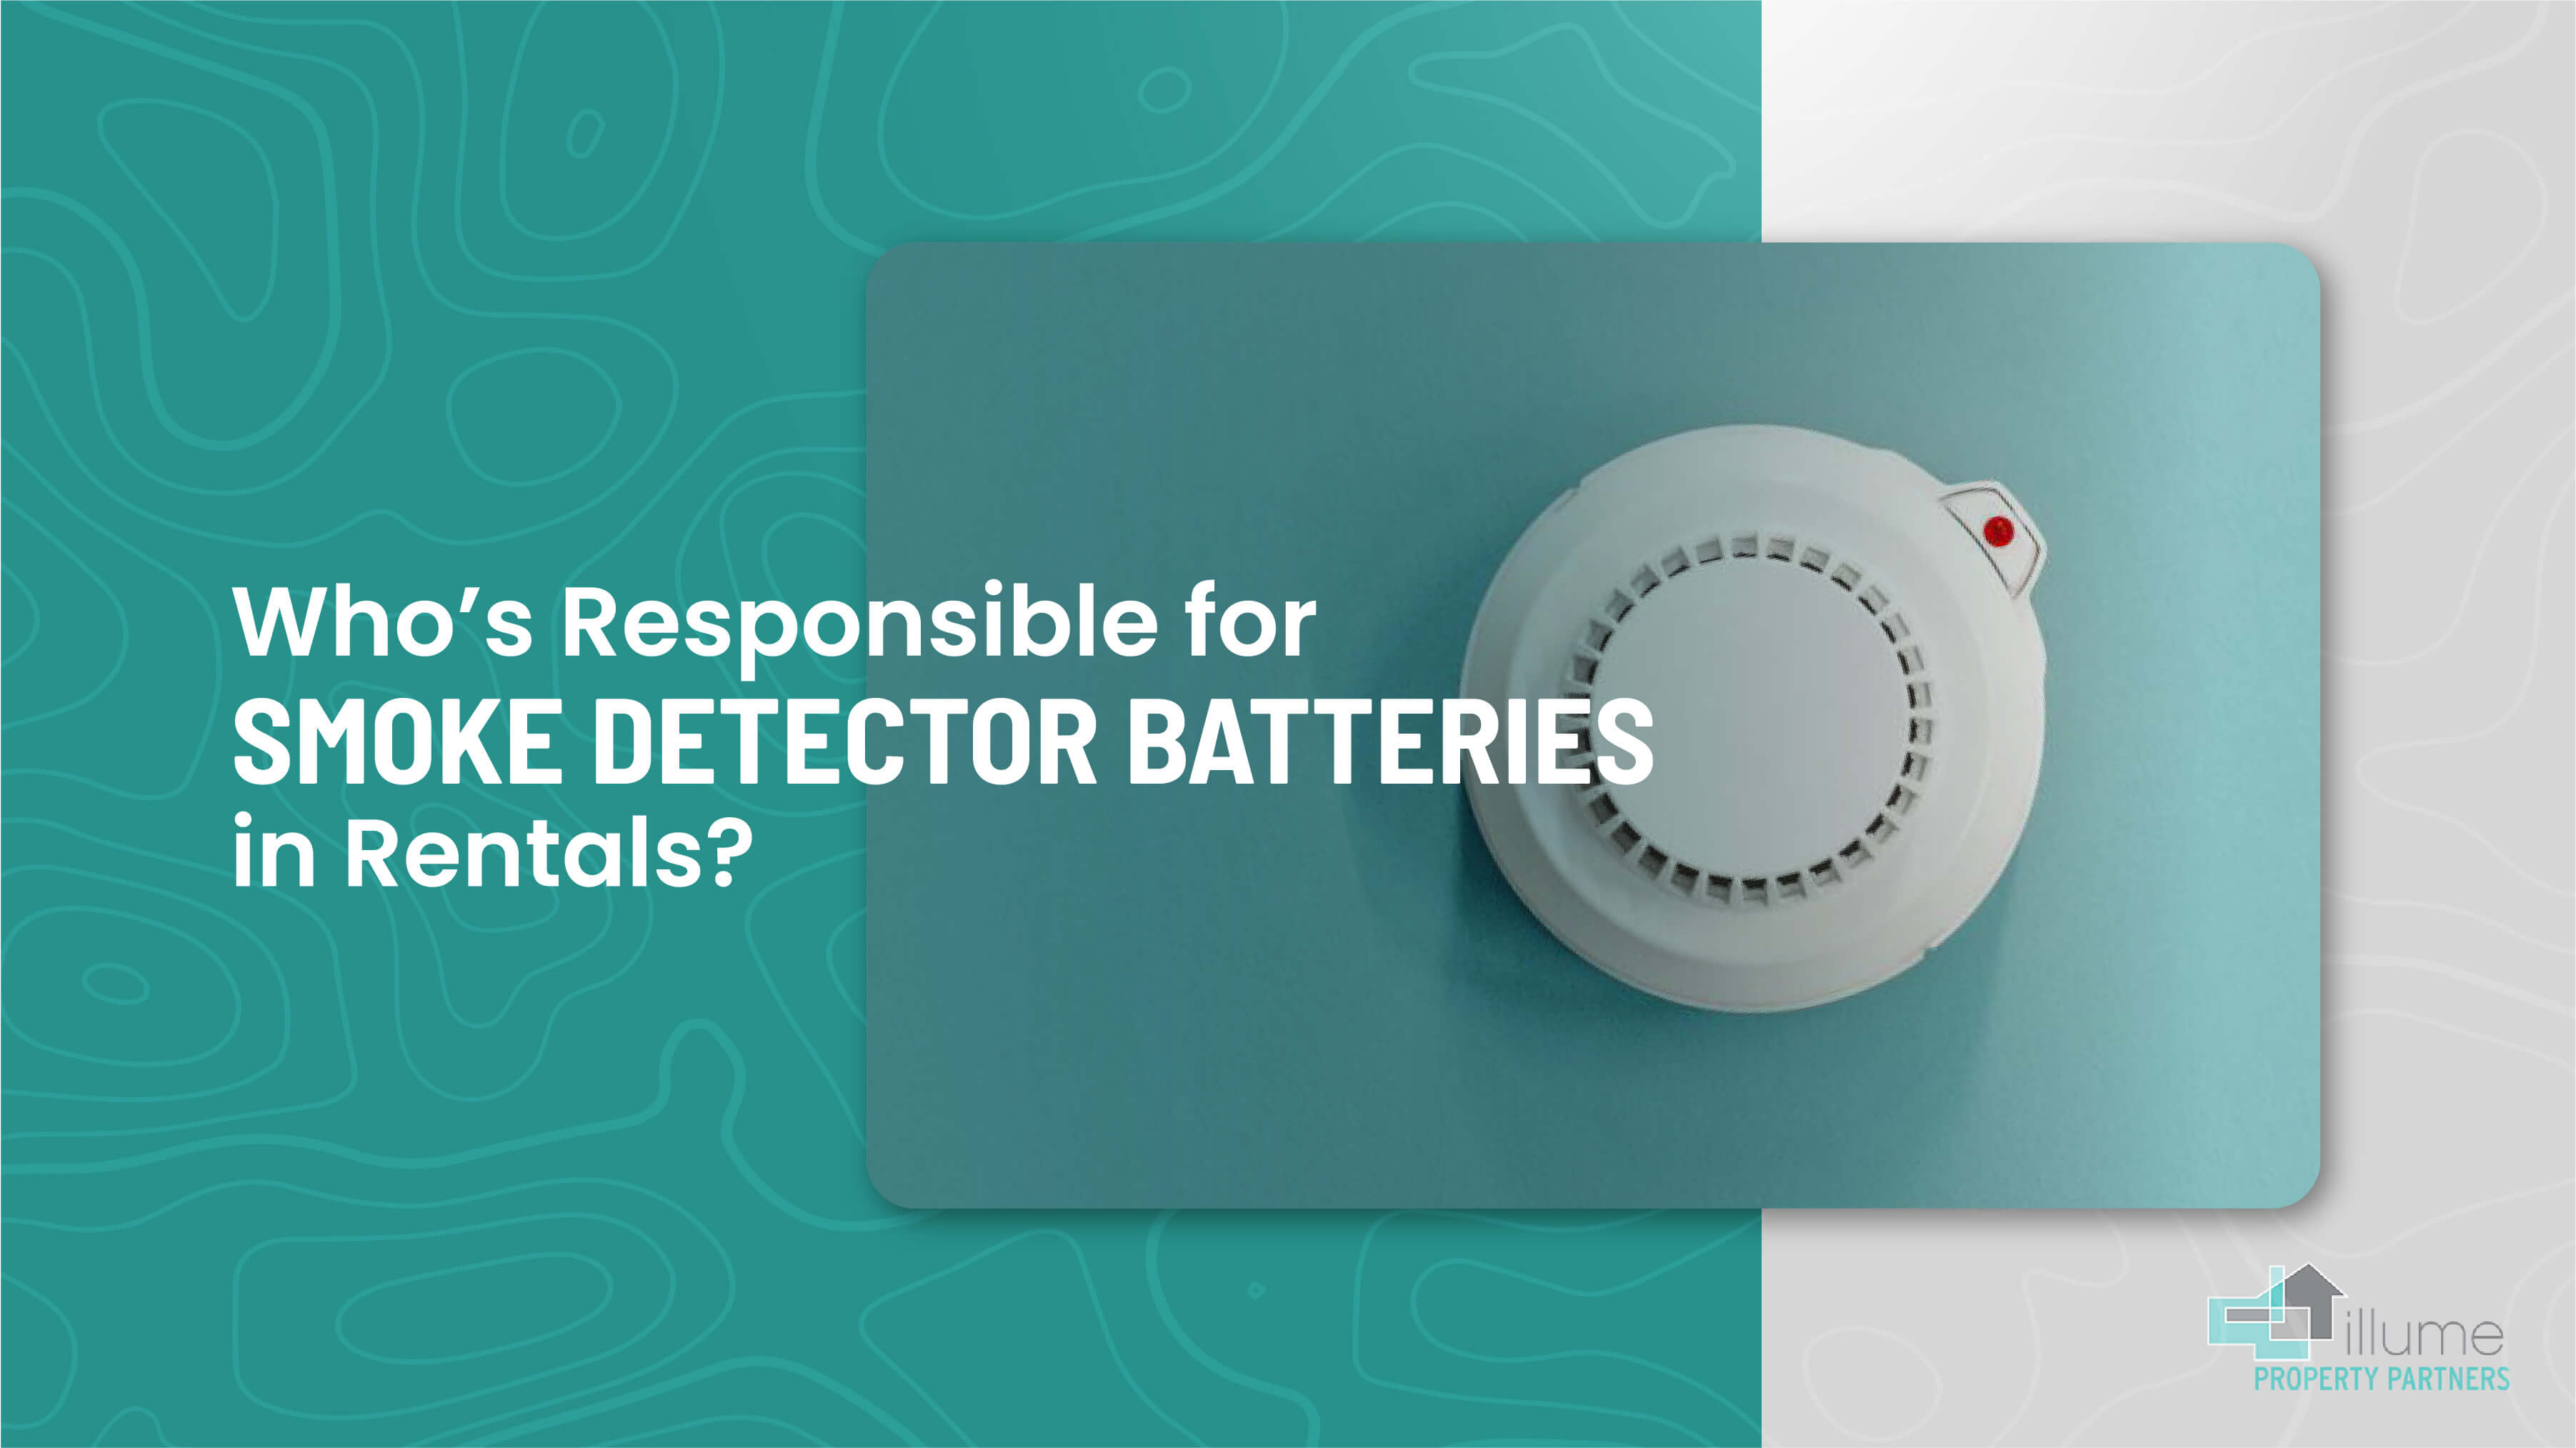 Who’s Responsible for Smoke Detector Batteries In Rentals?